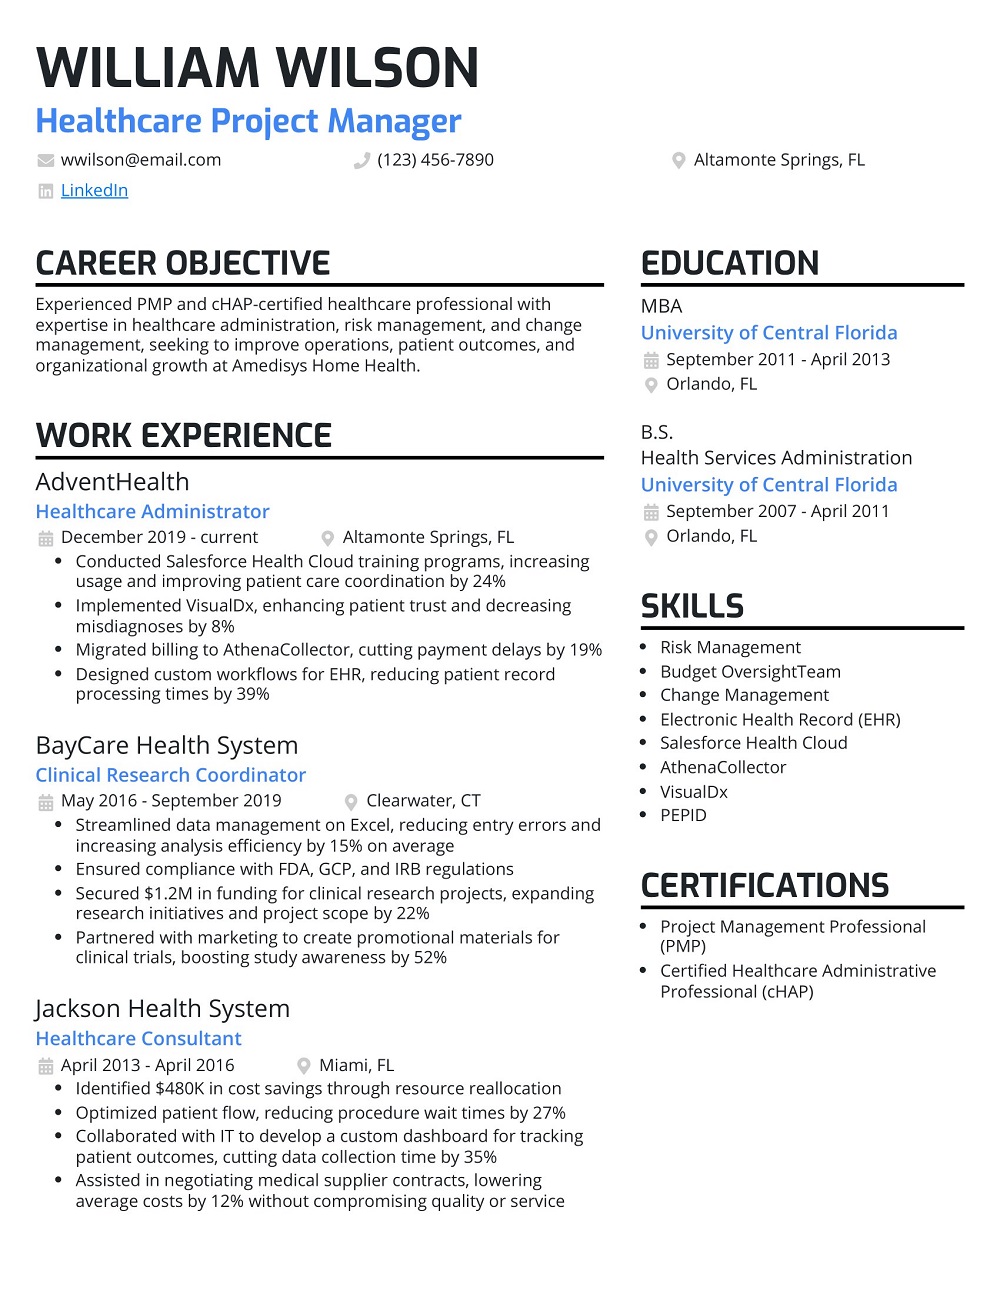 Healthcare Project Manager Resume Template